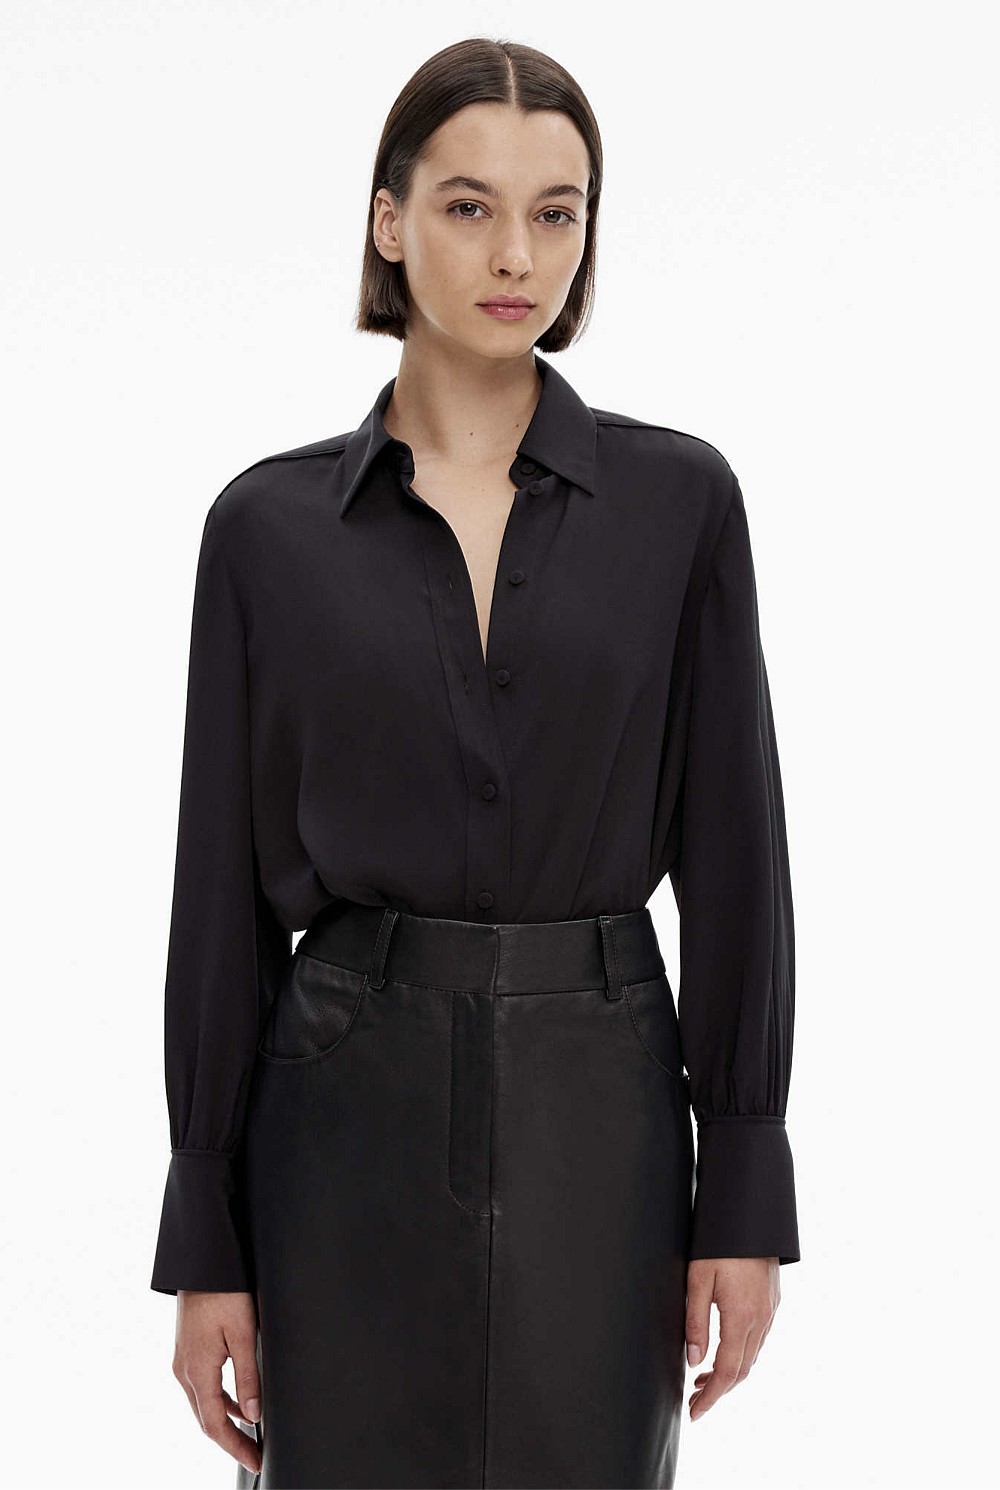 Shop Puff Sleeve Tops, Shirts & Blouses Online - Witchery